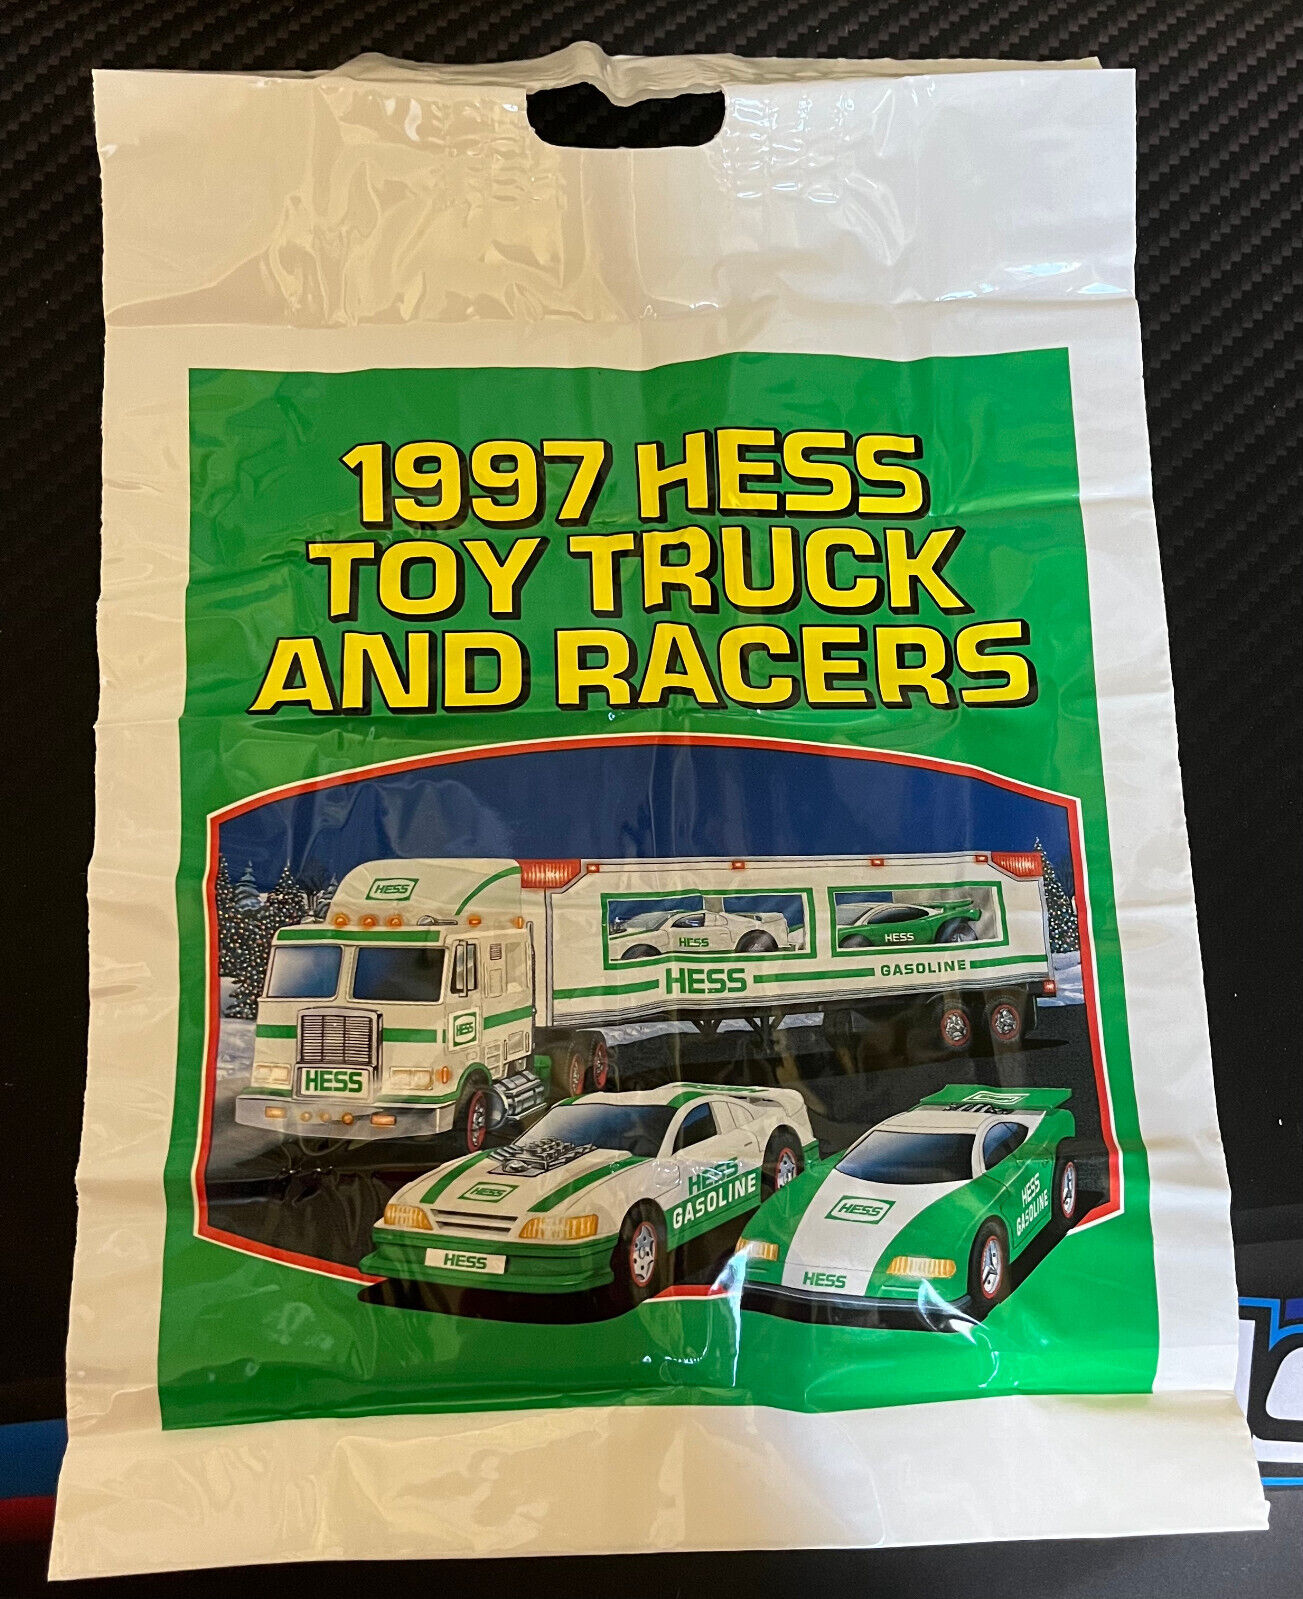 Vintage 1997 HESS Toy Truck and Racers Bag (New)